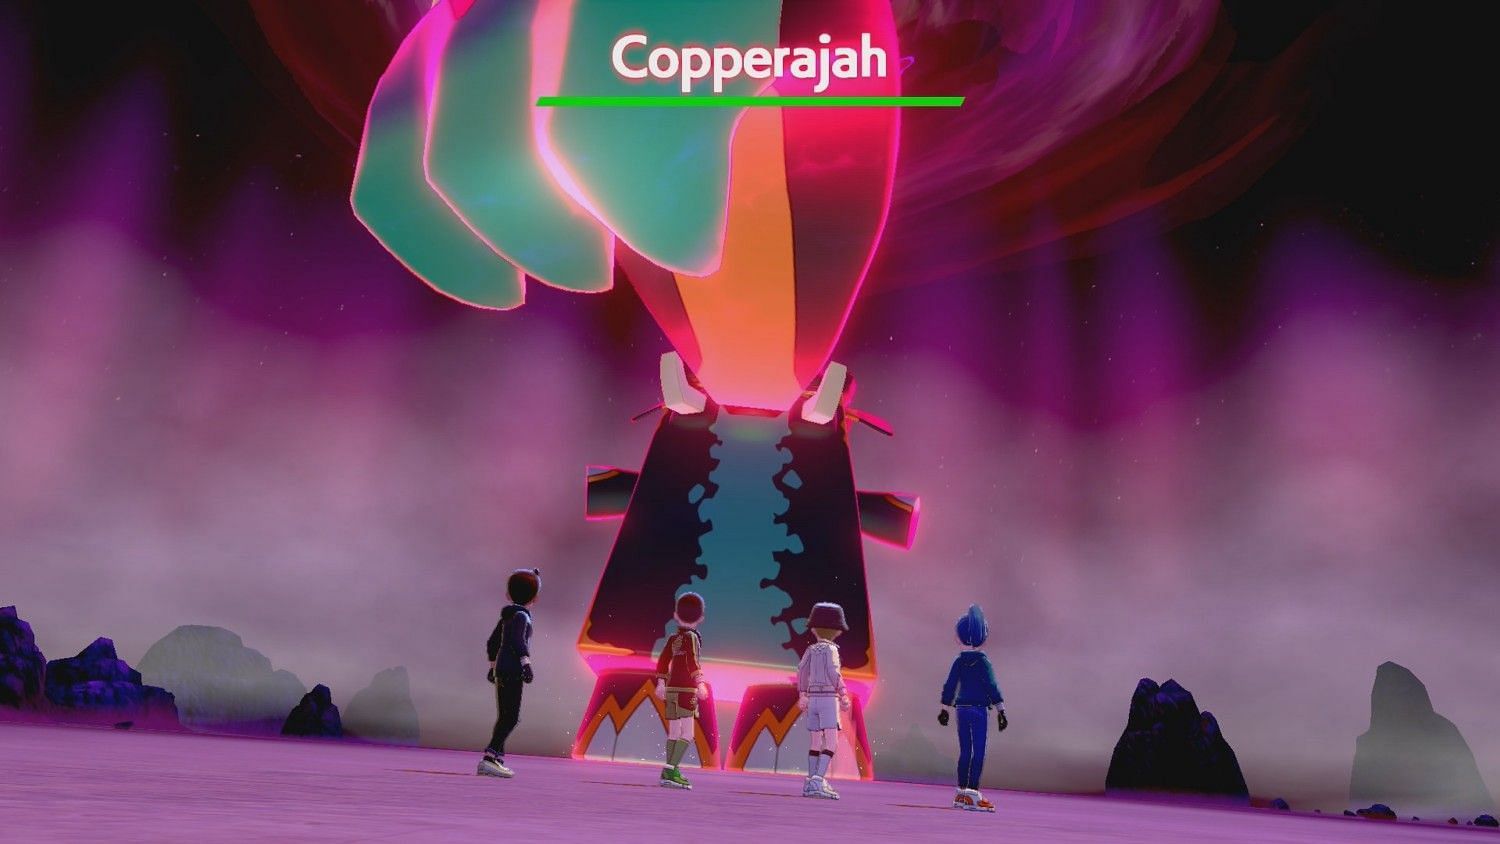 G-Max Copperajah as it appears in Pokemon Sword and Shield (Image via The Pokemon Company/NintendoSoup)